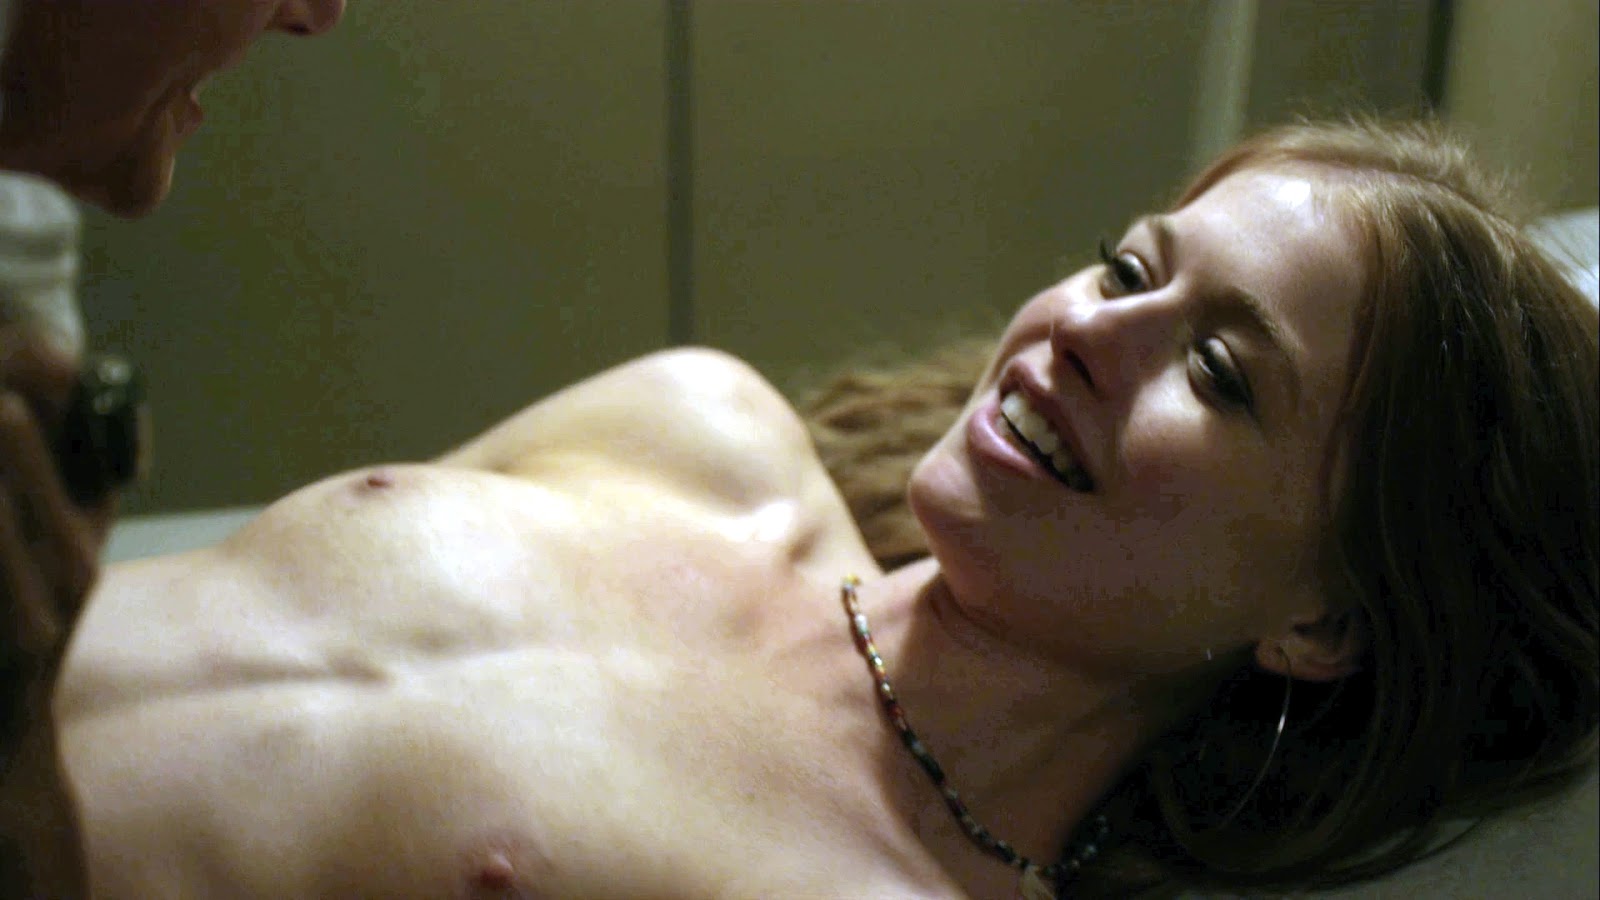 Genevieve angelson topless